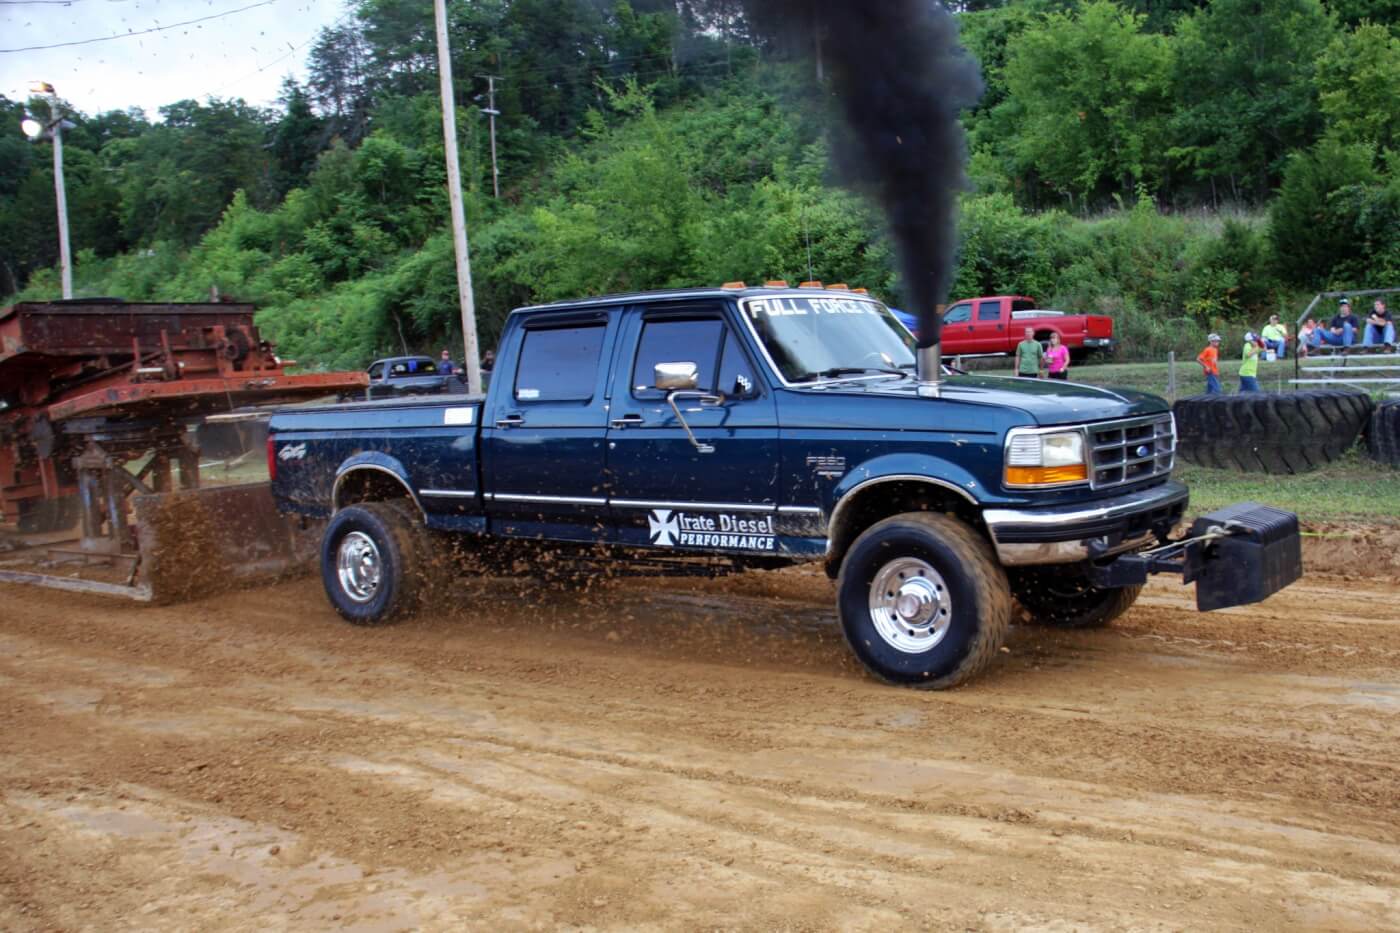 Steve Constable’s F-250 was impressive each time he hooked to the sled, dragging it the distance of the track